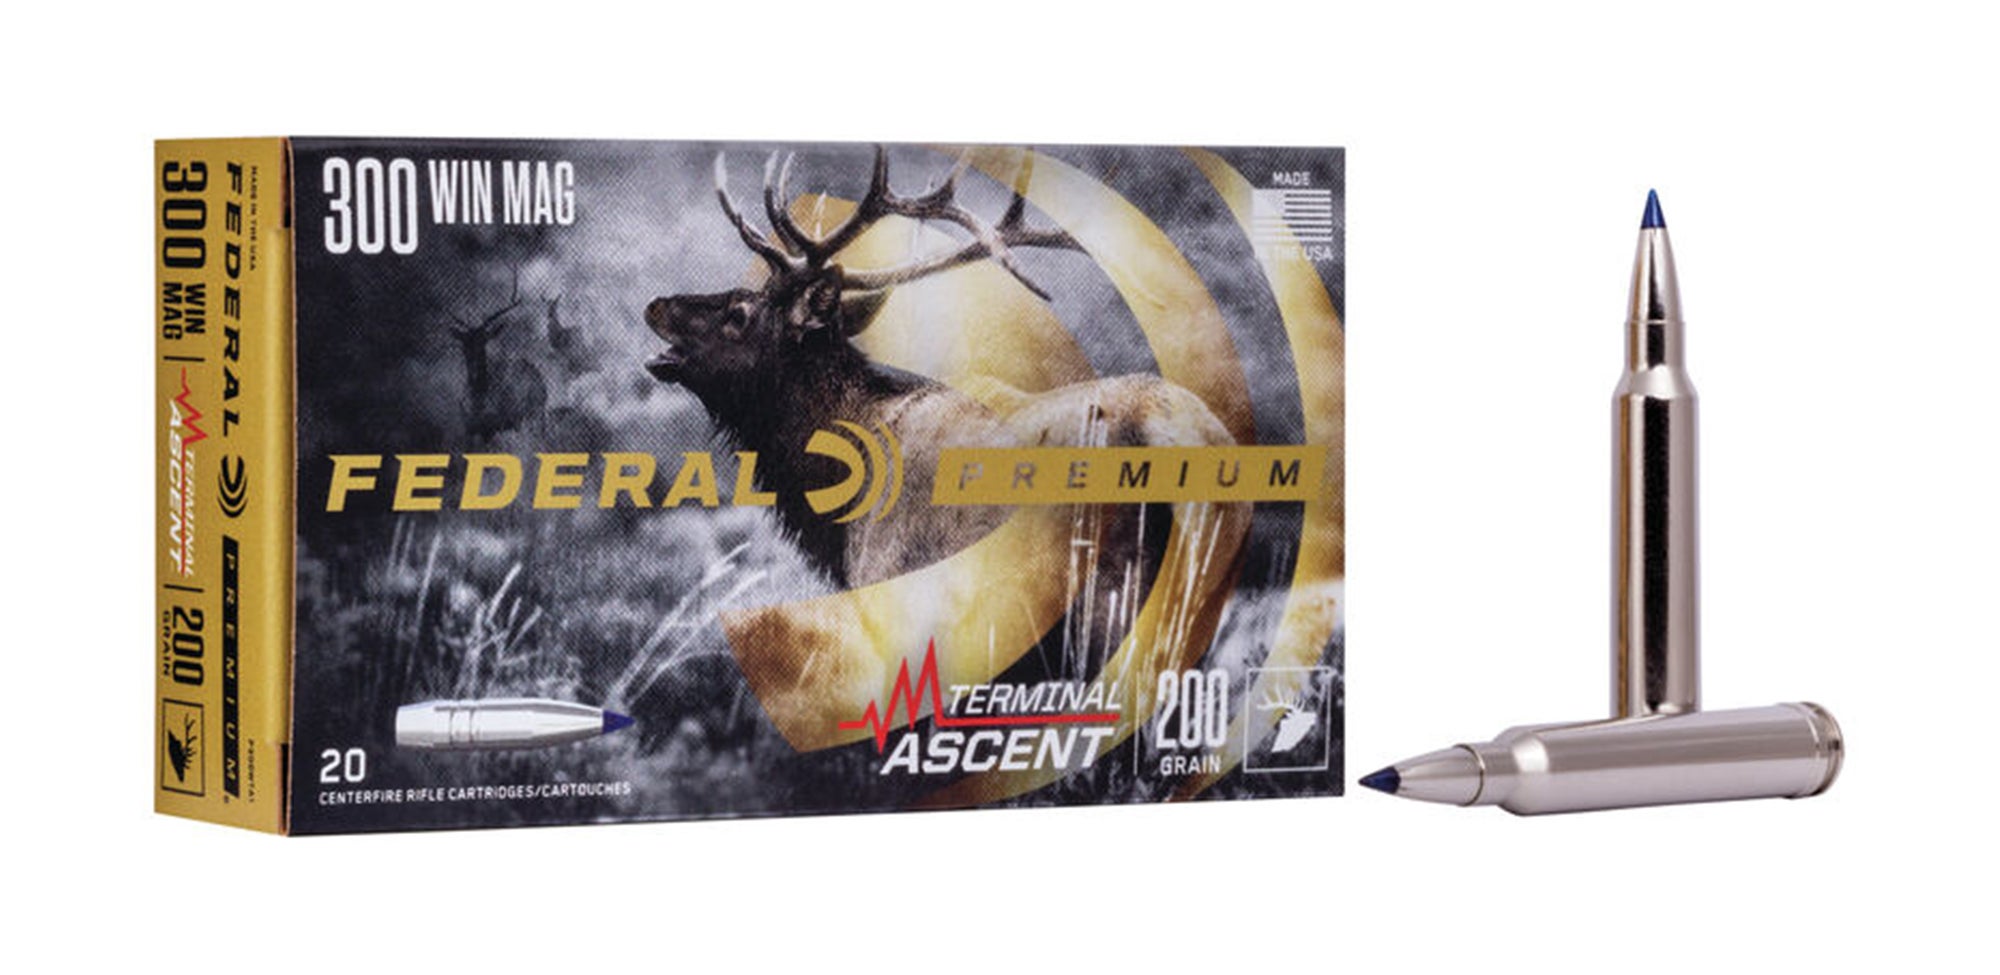 Box of Federal 300 Win Mag ammo and two loose rounds on white background